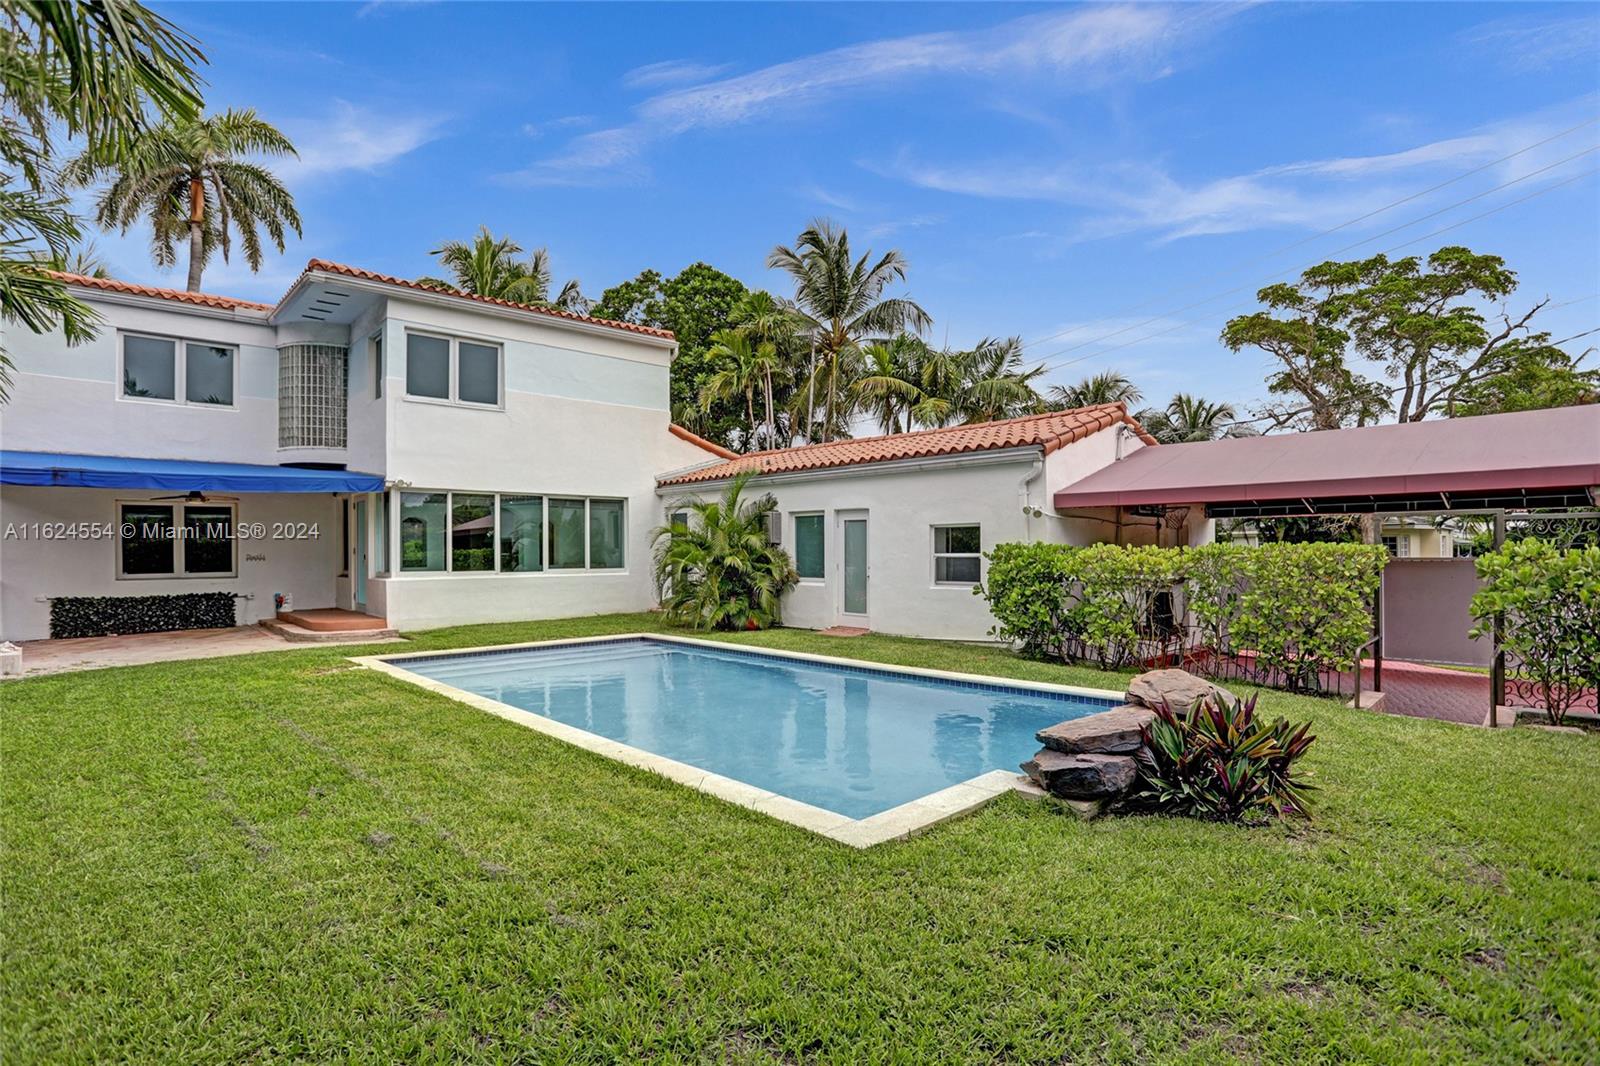 Discover this stunning 6-bedroom residence in the heart of Miami Beach, featuring 5 full bathrooms and 2 half bathrooms. Situated on a corner lot of nearly 10,000 square feet, the property boasts an impressive interior living space of approx. 3,361 square feet, complemented by a generously sized swimming pool. Don't miss this exceptional opportunity!